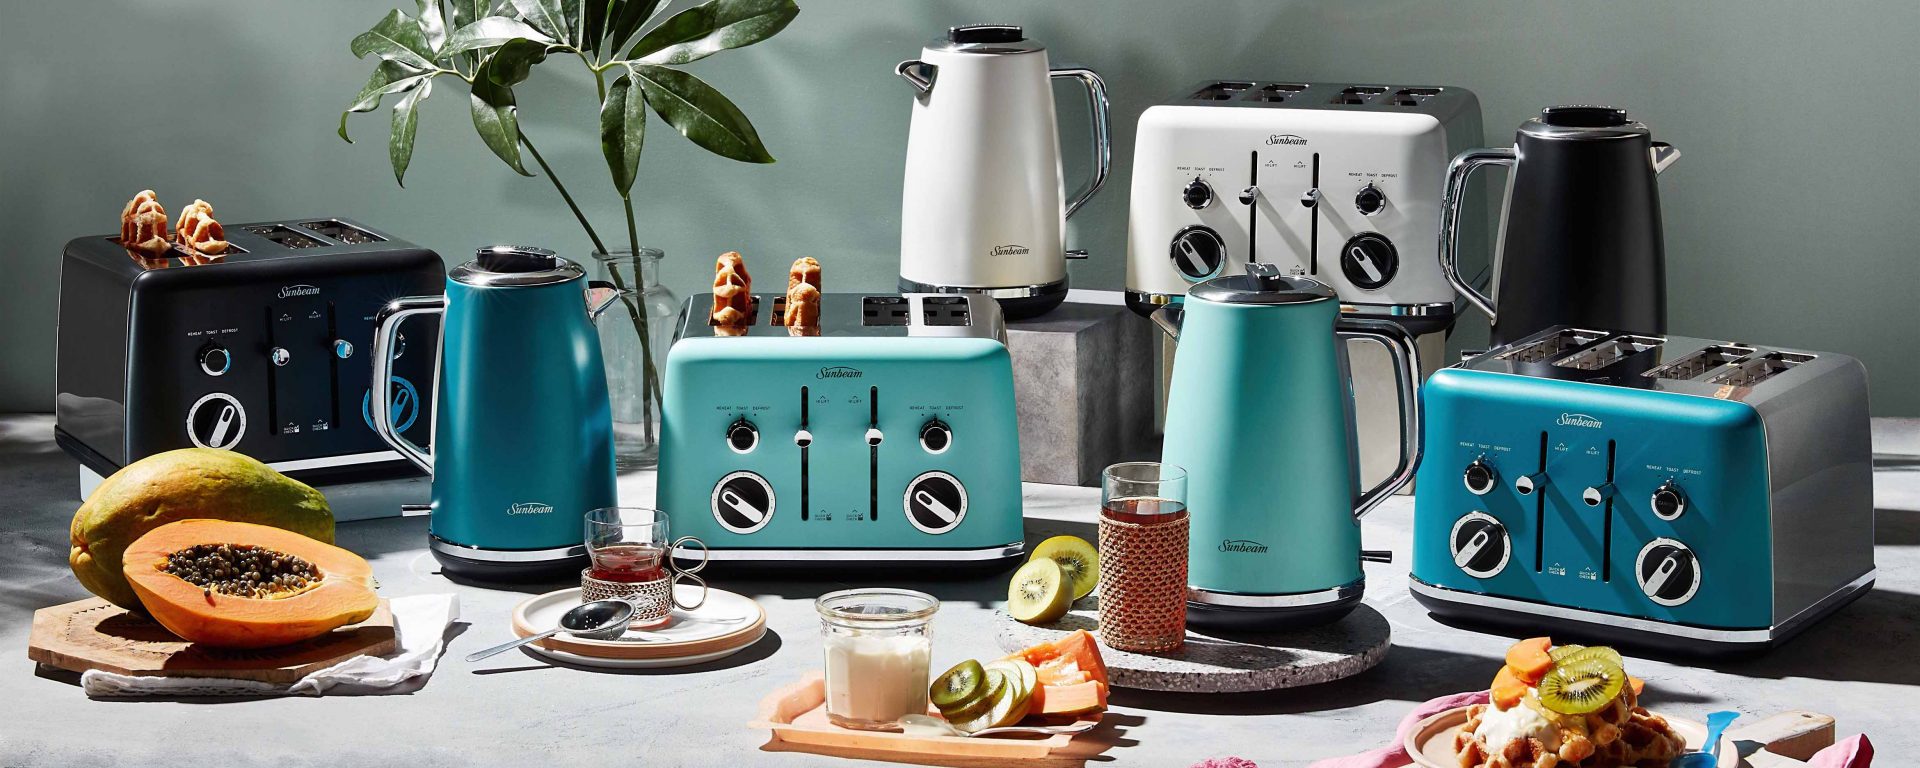 Stylish colour appliances available at Harvey Norman.